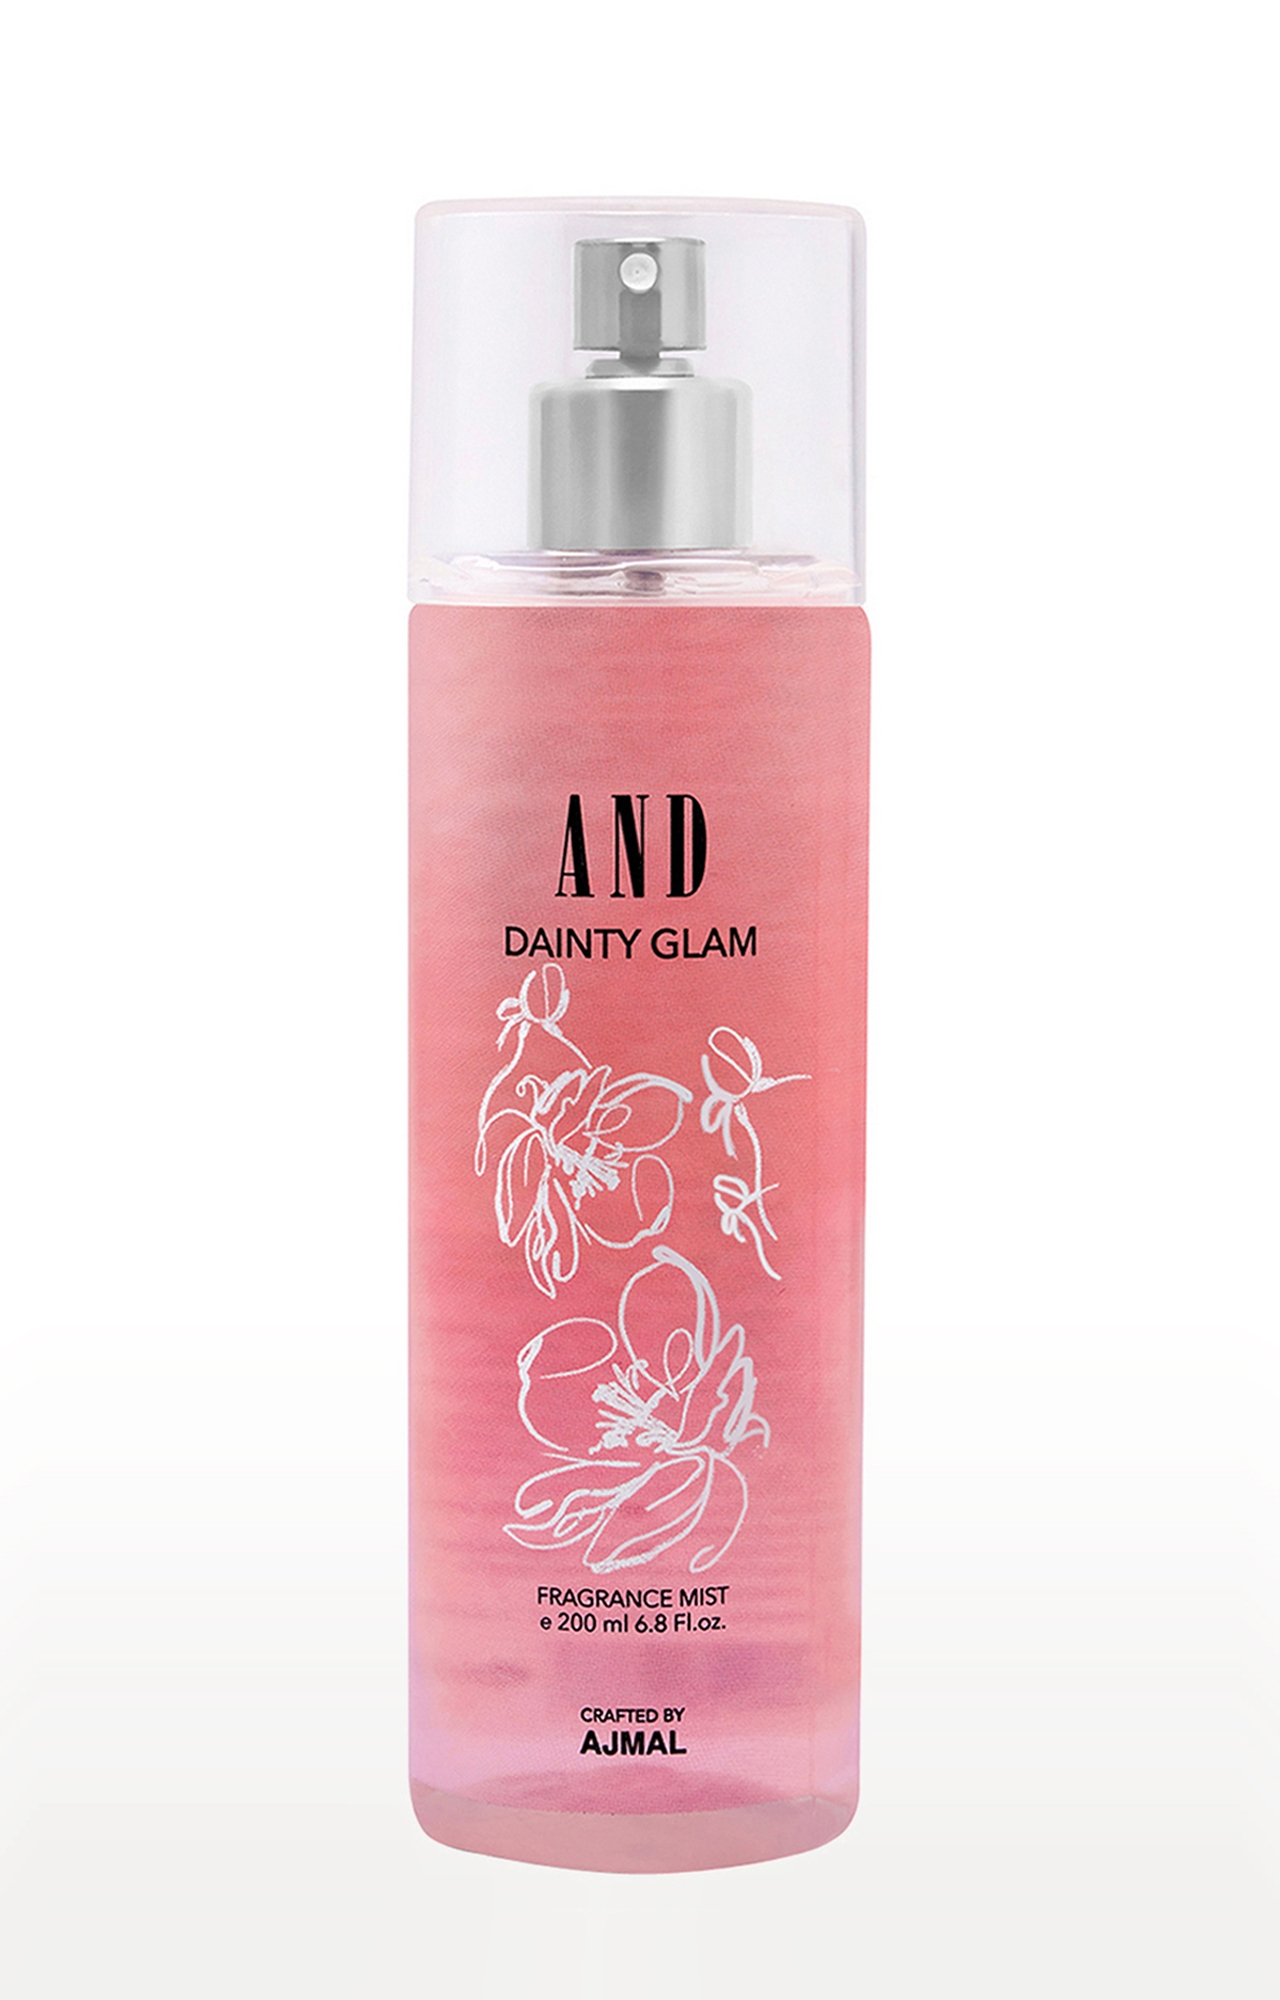 AND Dainty Glam Body Mist Perfume 200ML Long Lasting Scent Spray Gift For Women Crafted by Ajmal